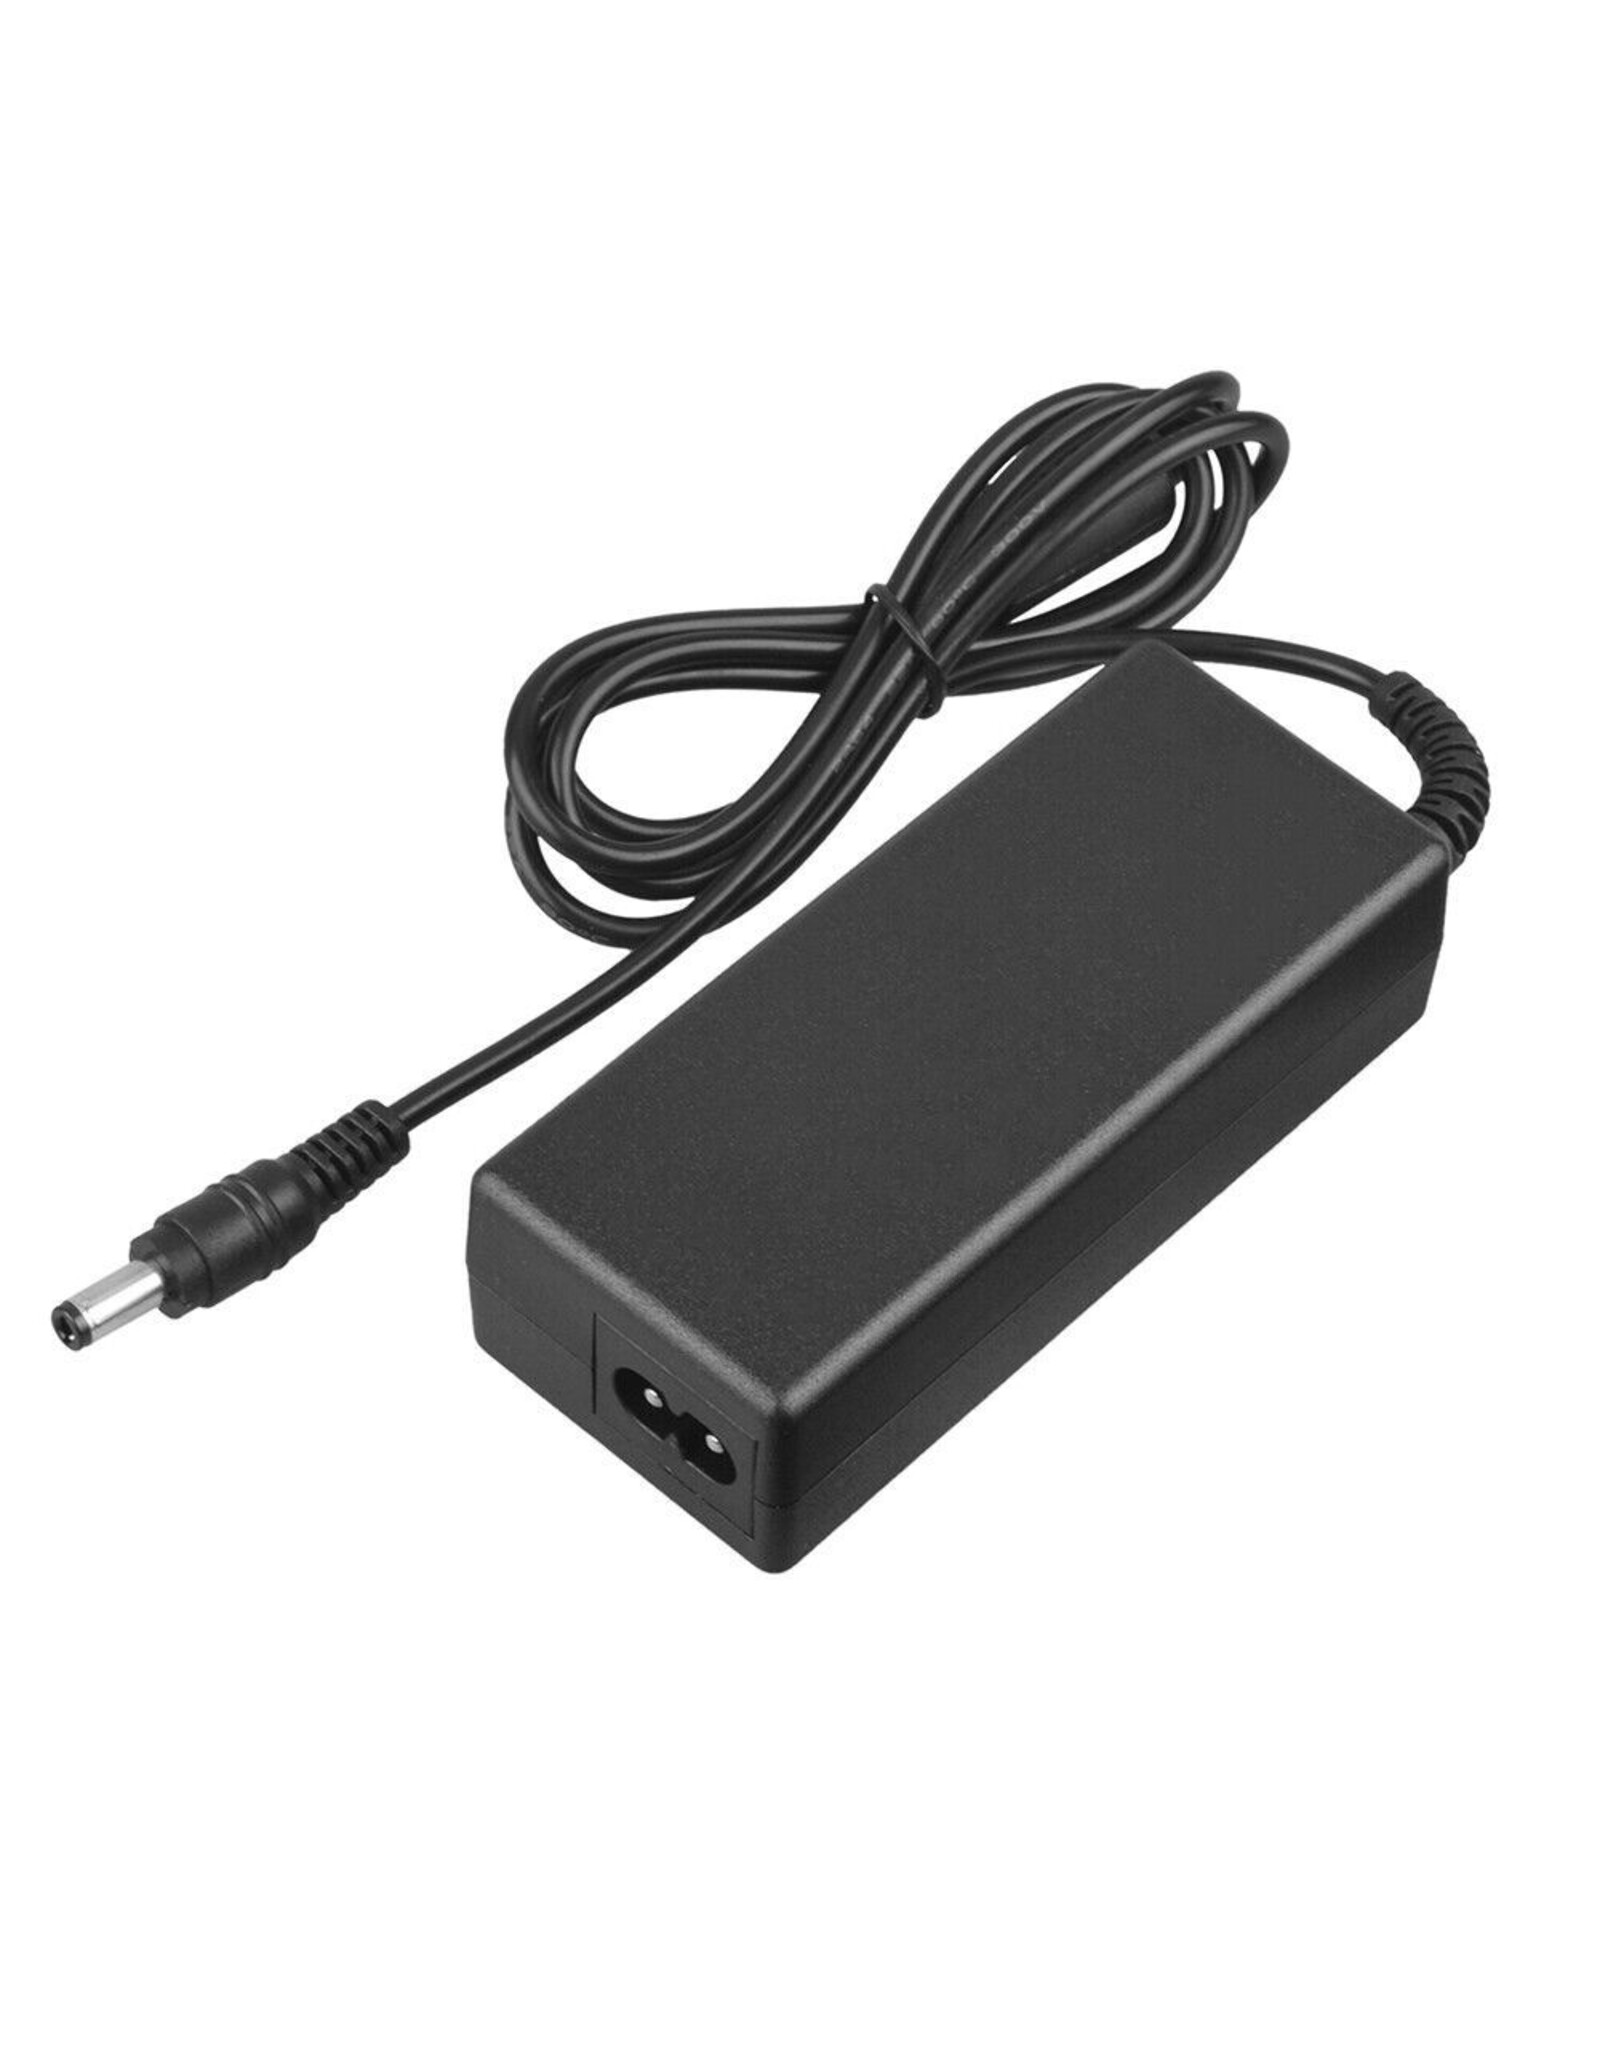 Meade Meade 07584 Universal AC Adapter for Meade Universal Telescope  Power Supply ETX90 and similar